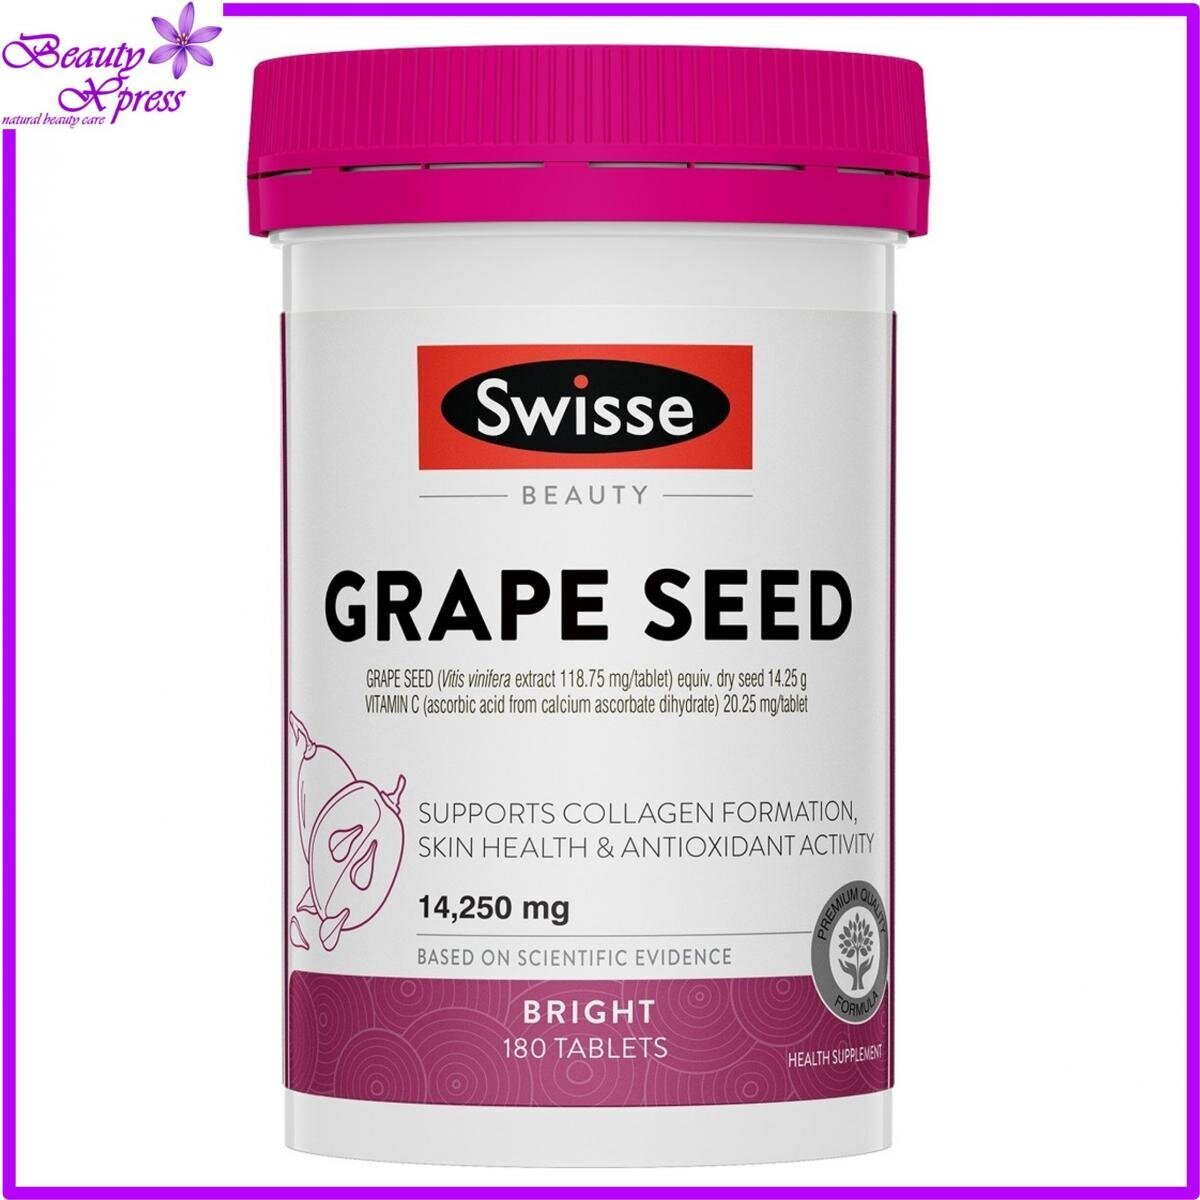 Ultiboost Grape Seed Extract 180 tablets(RANDOM Packing)[Parallel Goods]